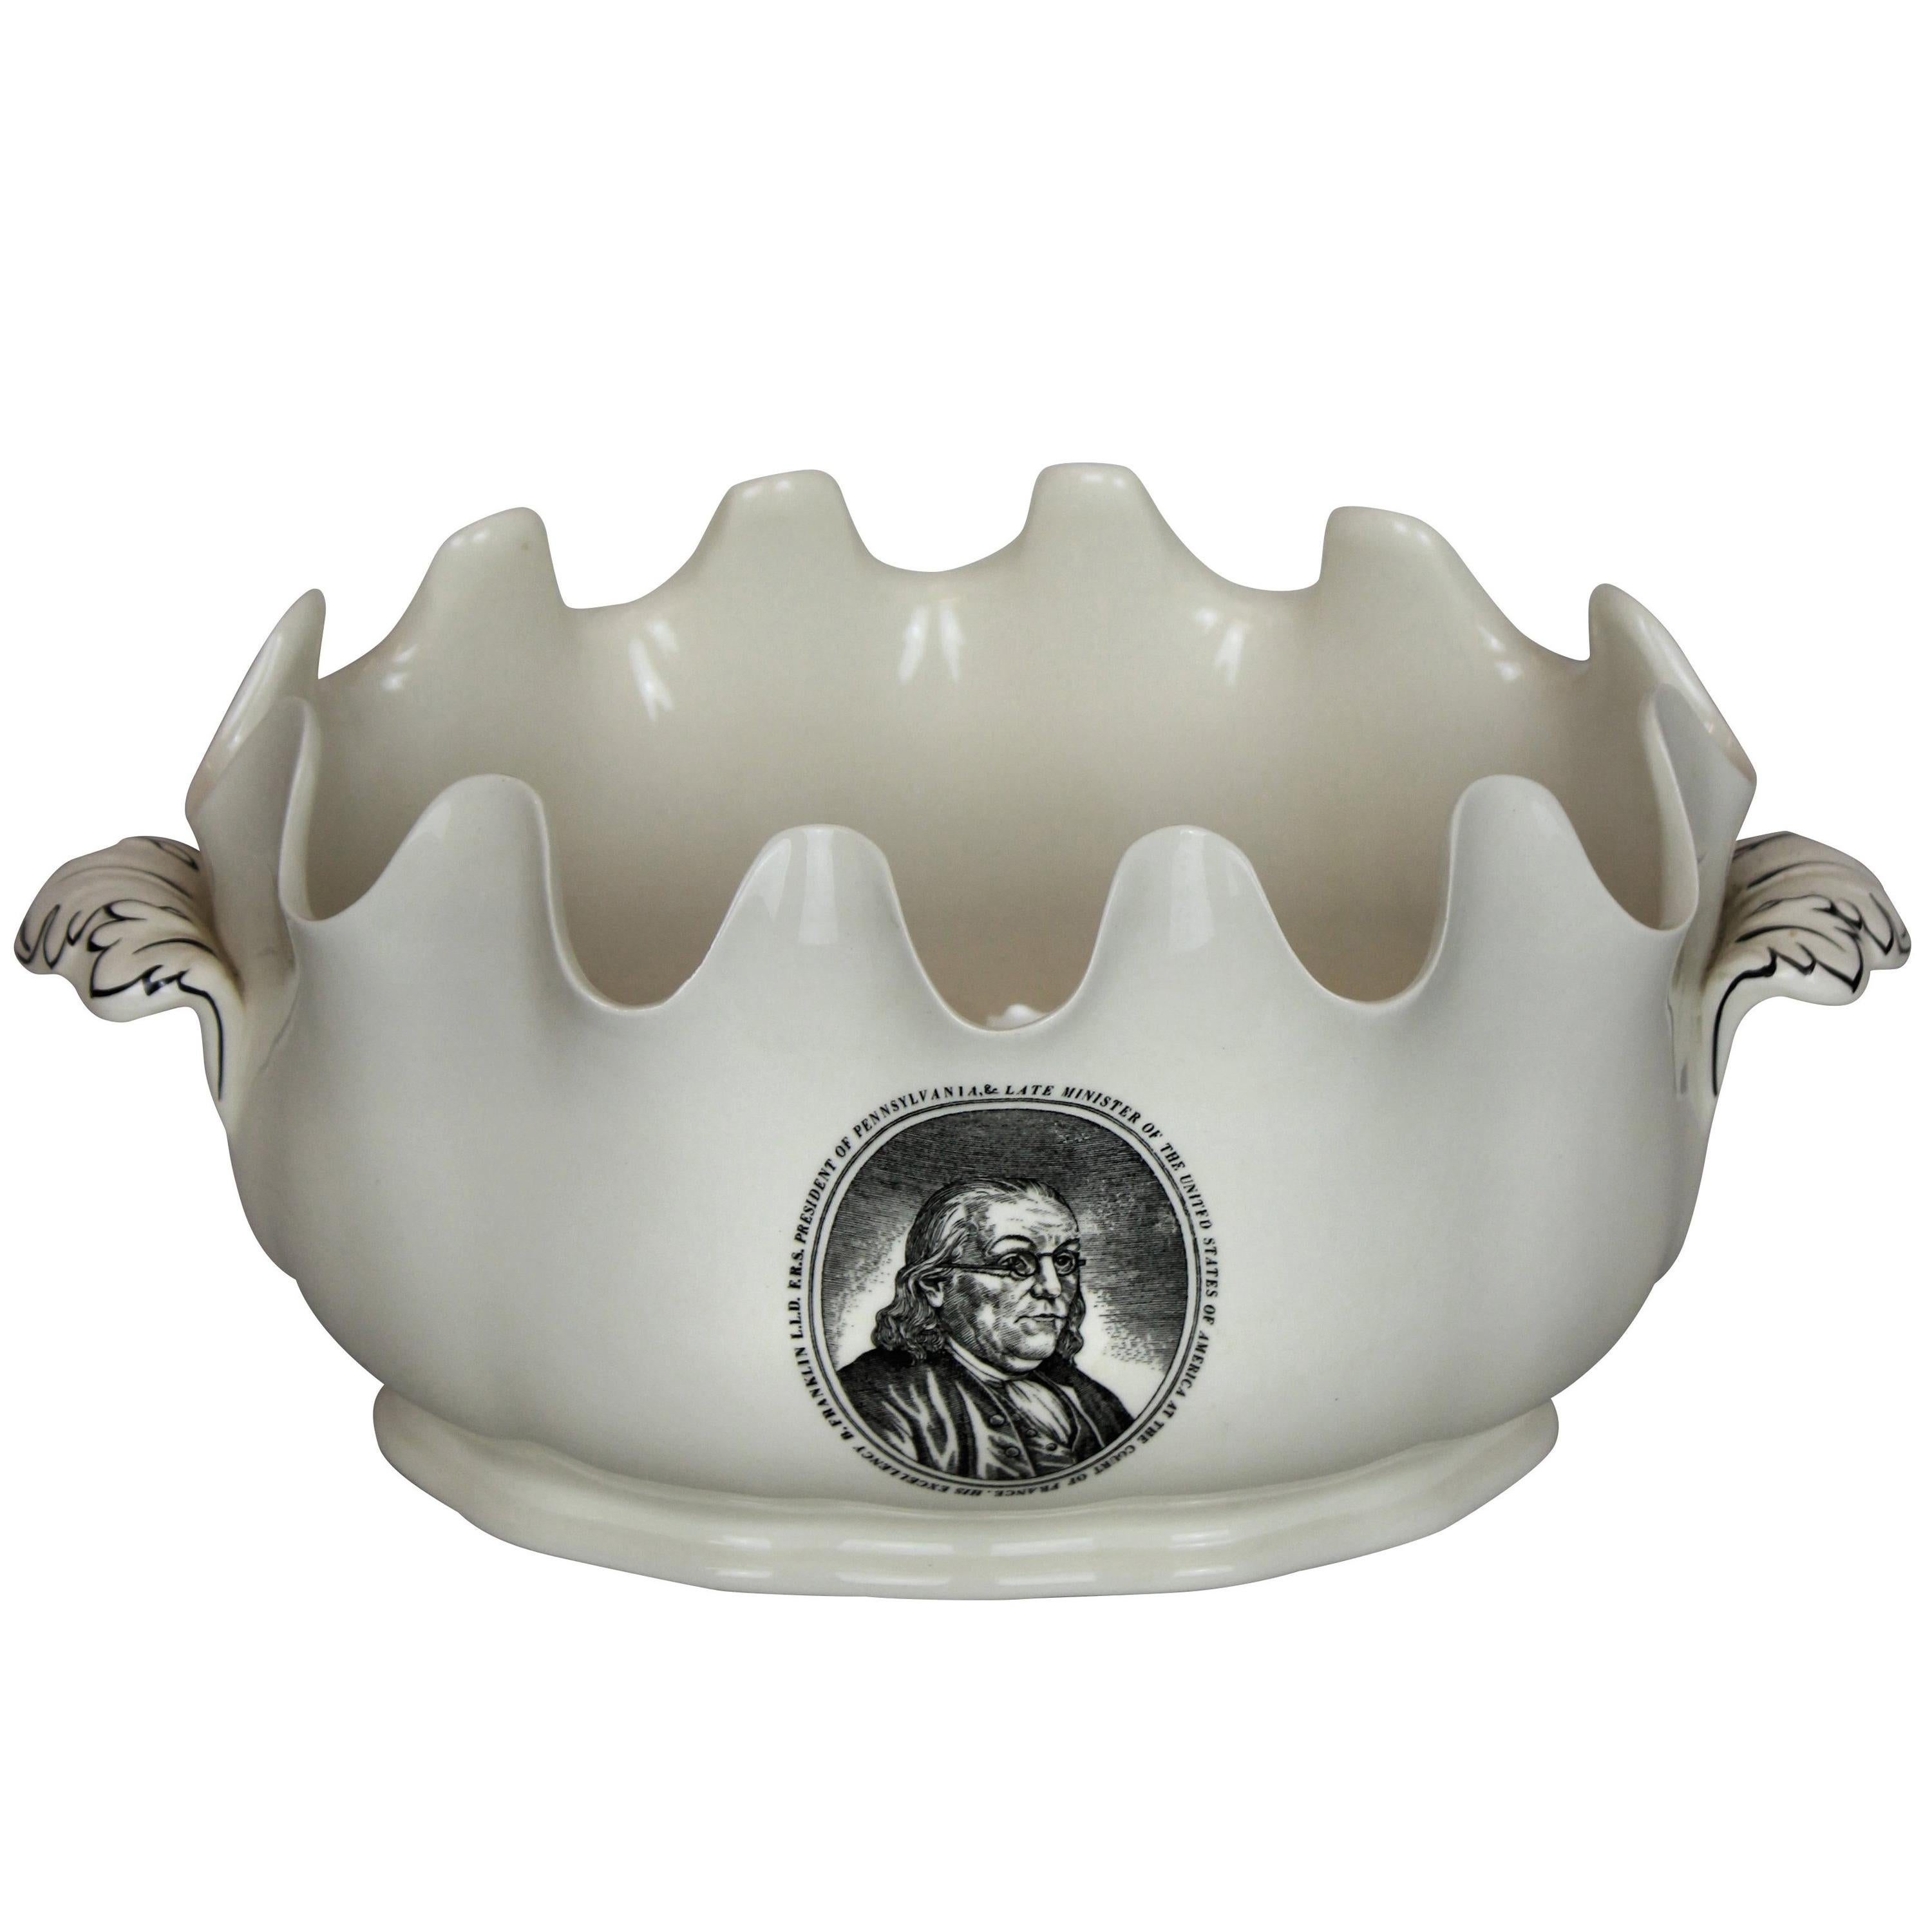 A Wedgwood cream ware cachepot with attractive scalloped edge depicting Benjamin Franklin.

